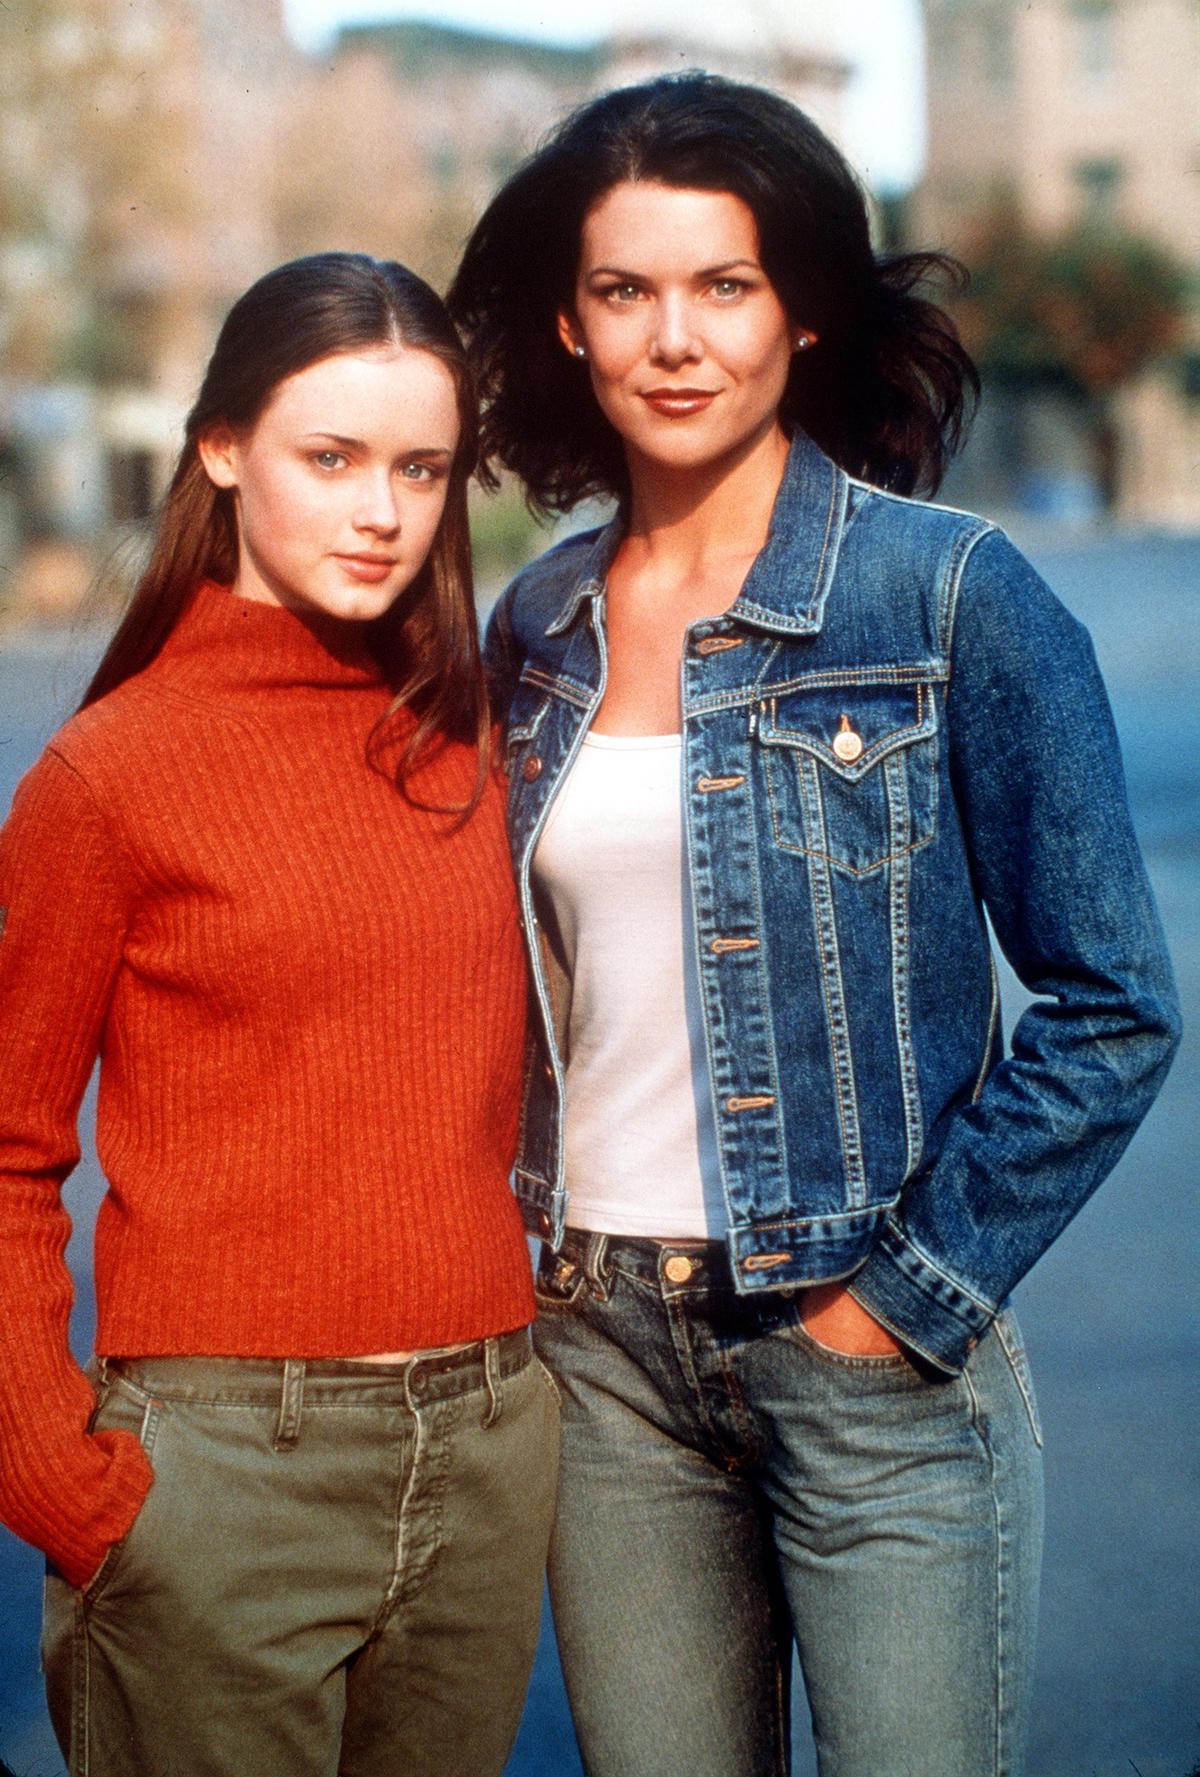 Alexis Bledel and Lauren Graham as Rory and Lorelai Gilmore from 'Gilmore Girls'